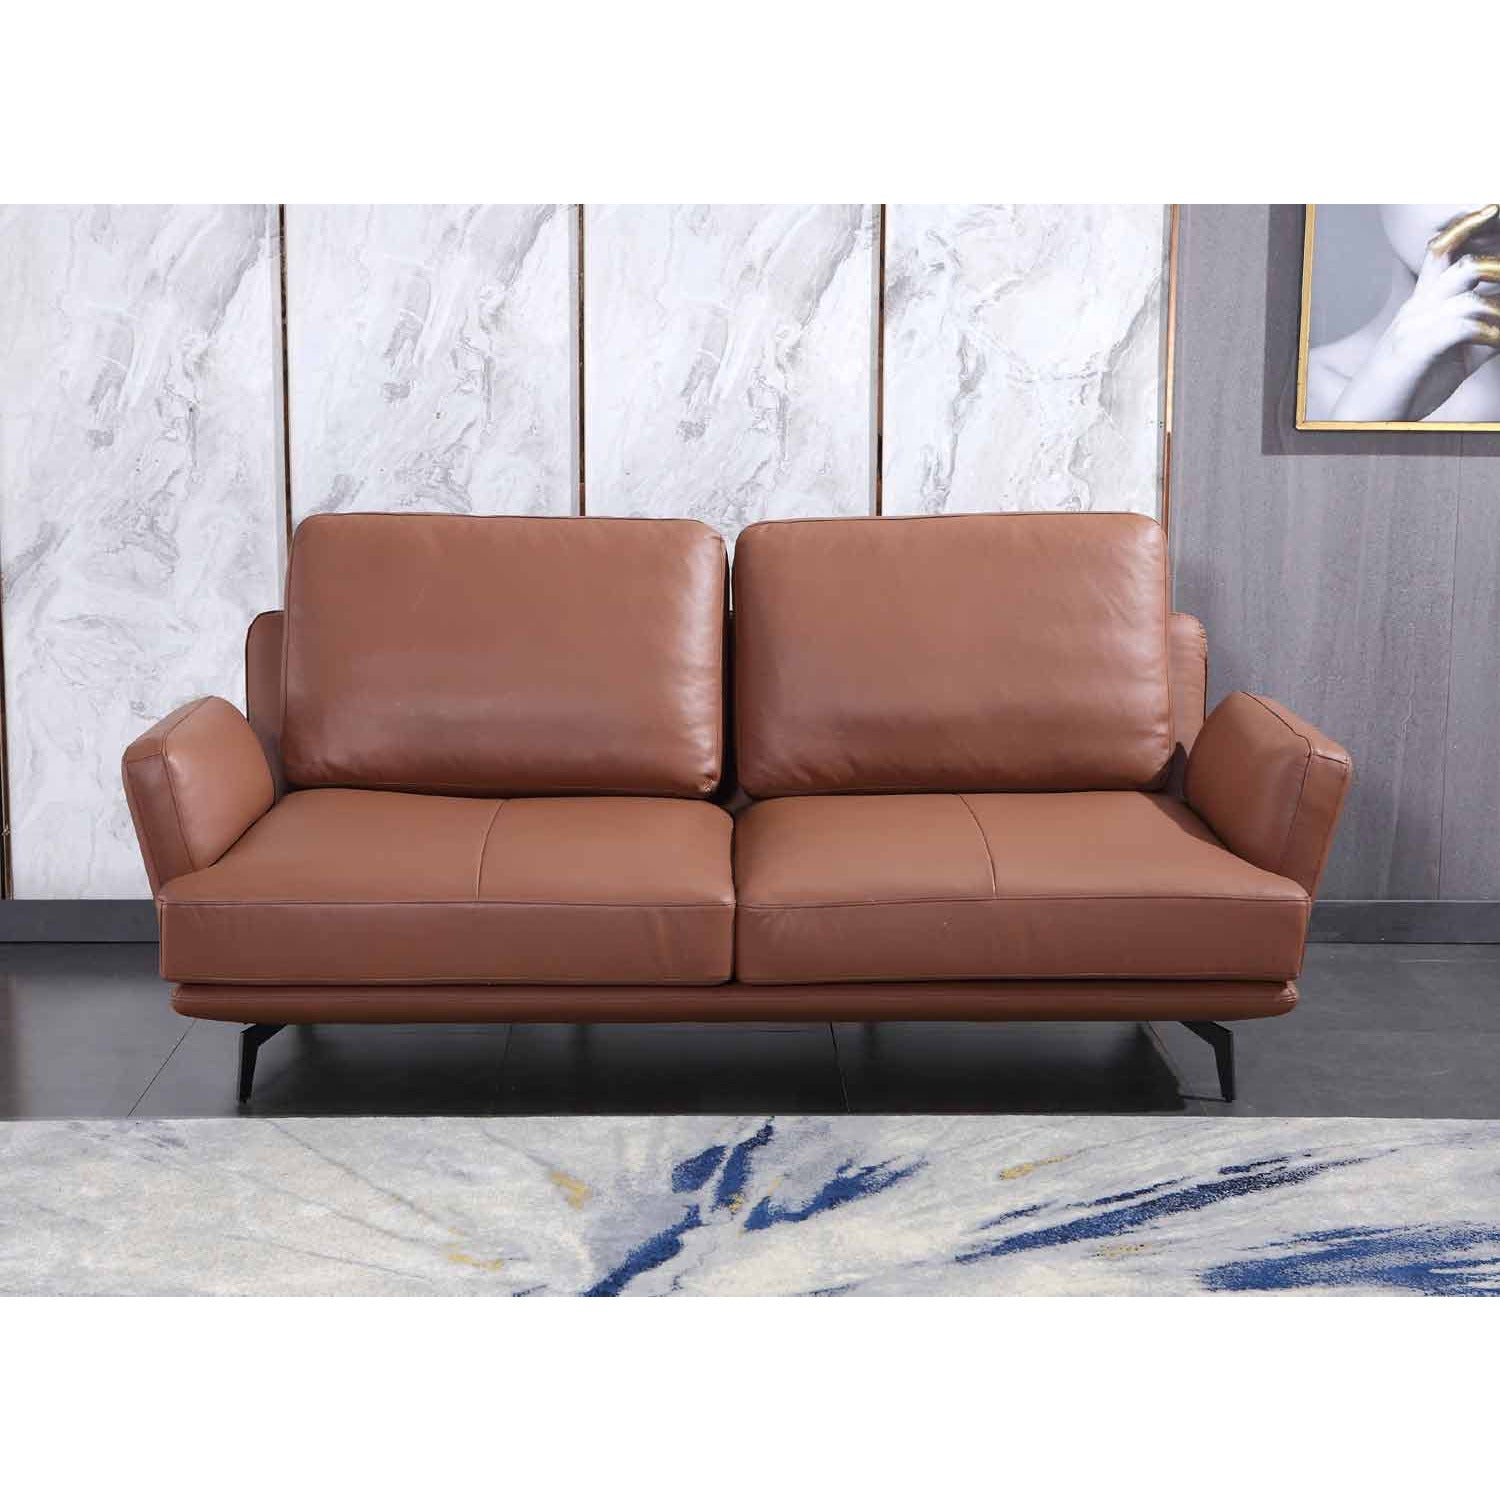 European Furniture - Tratto 3 Piece Living Room Set in Russet Brown - 37455-3SET - New Star Living